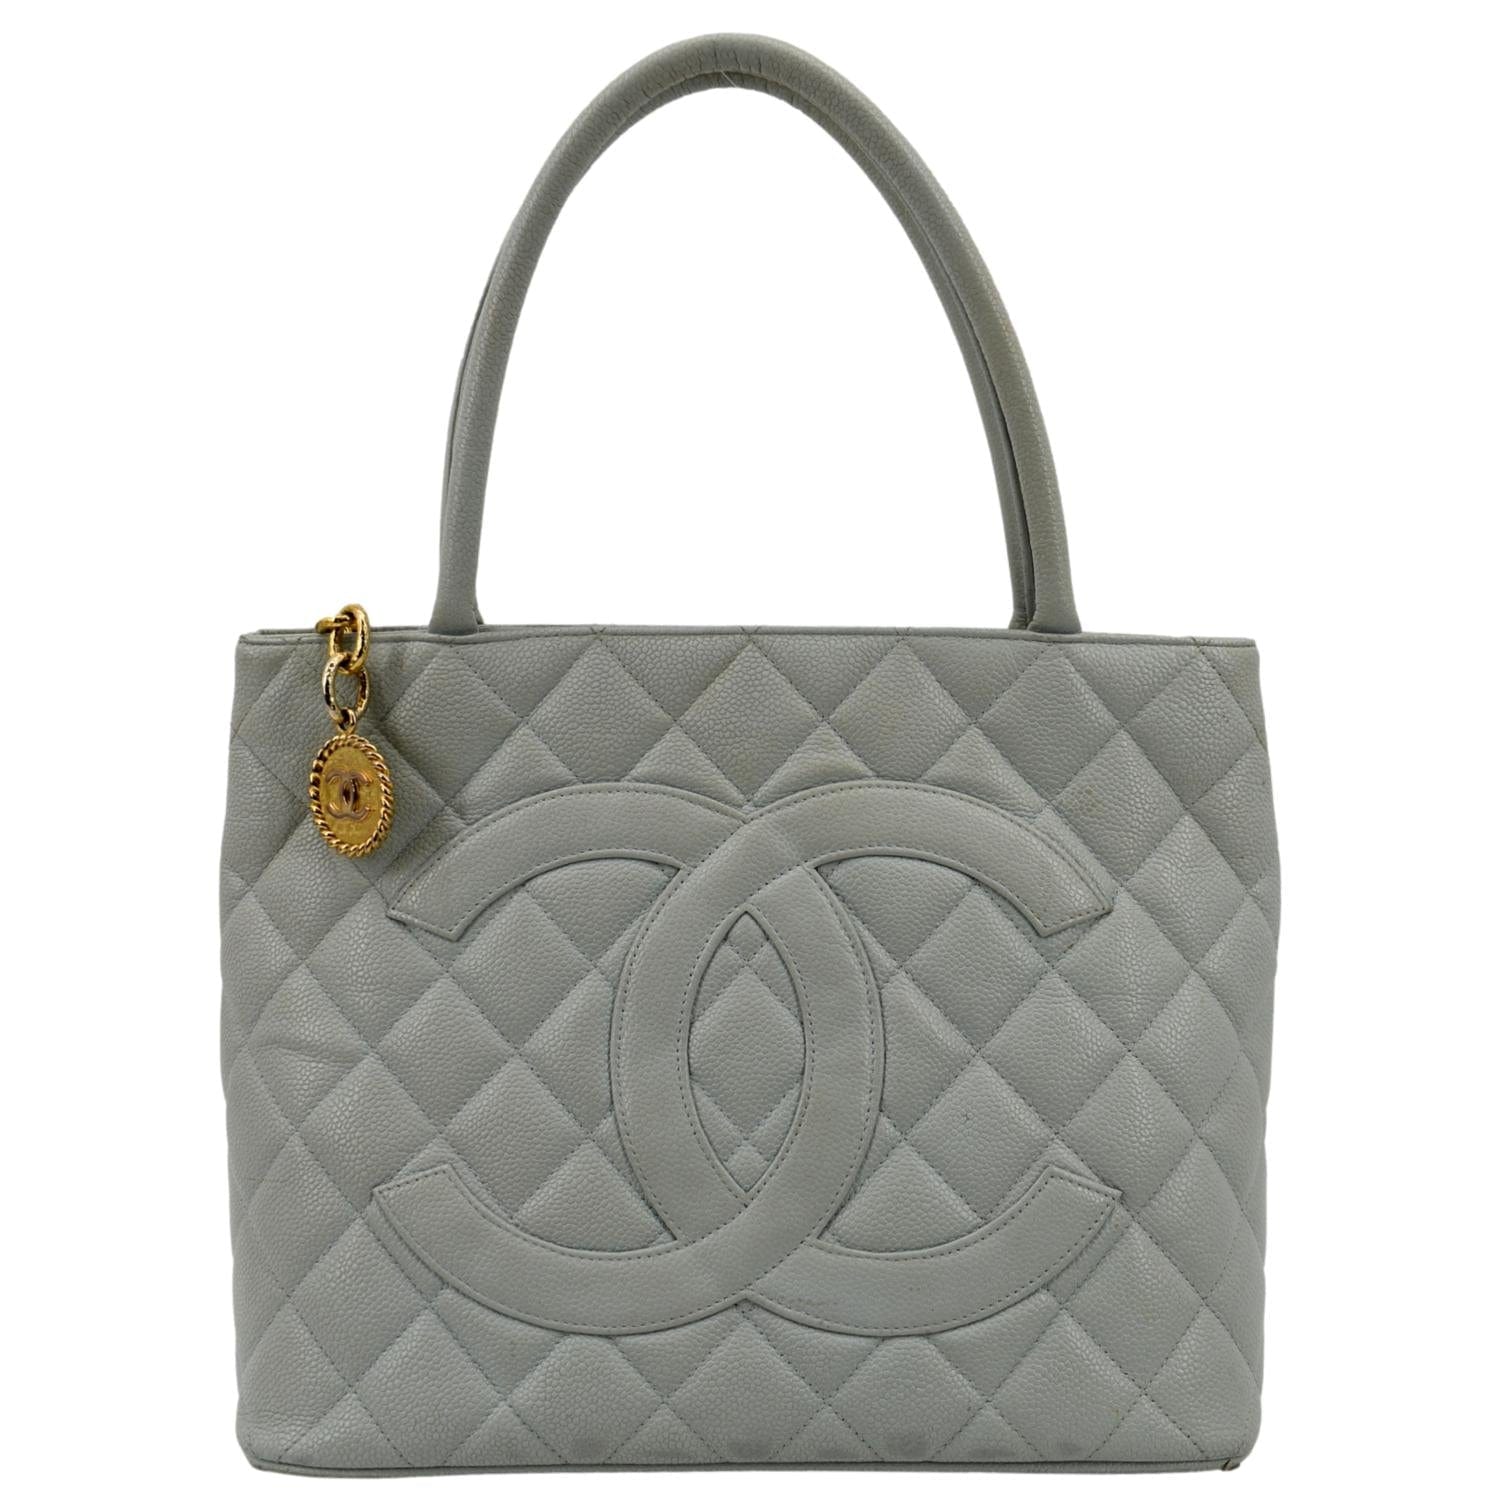 CHANEL Pre-Owned 2003-2005 Medallion Tote Bag - Farfetch